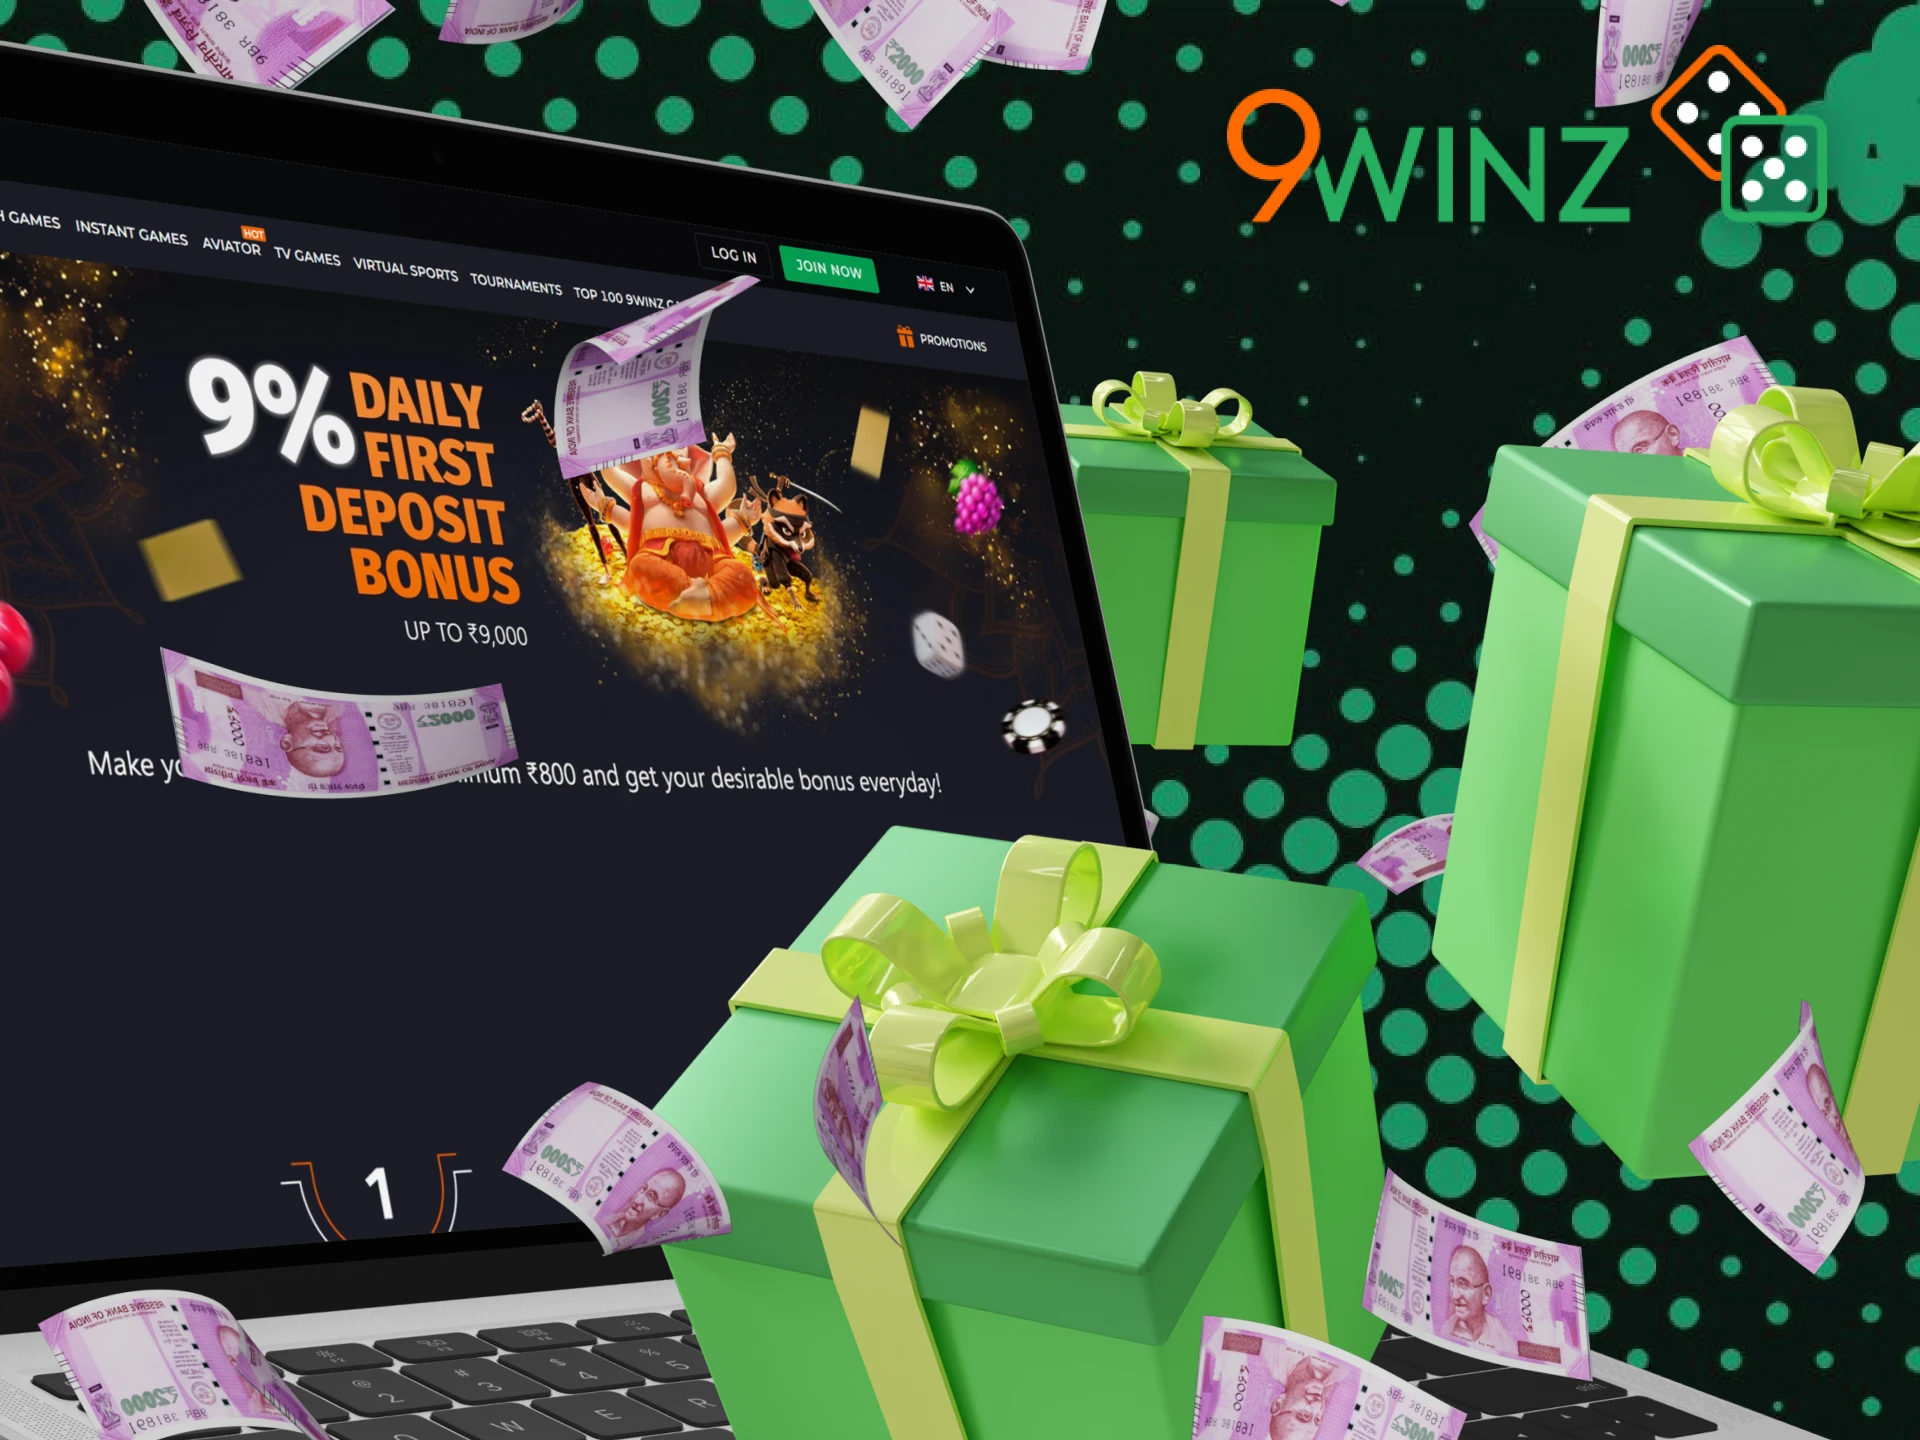 Make a deposit into your 9Winz account to receive your first deposit bonus.